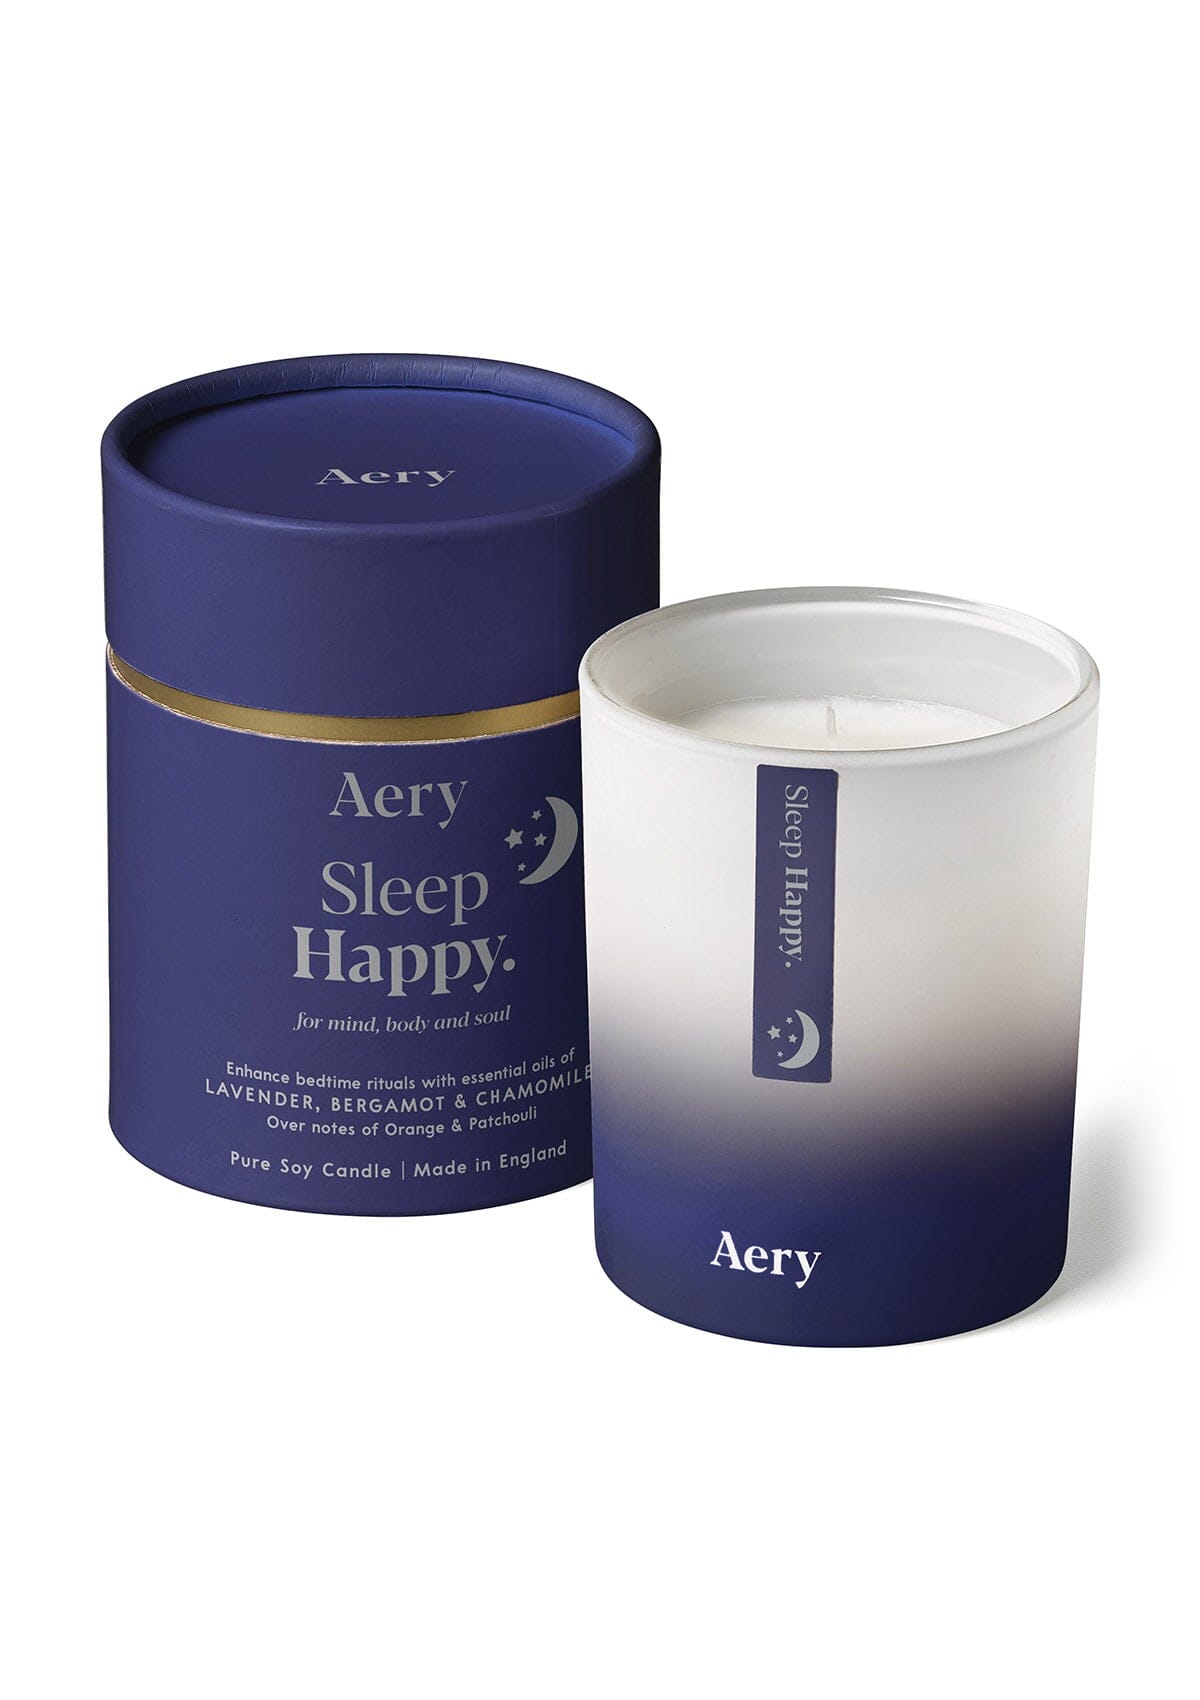 deep blue sleep happy candle with product packaging by Aery 